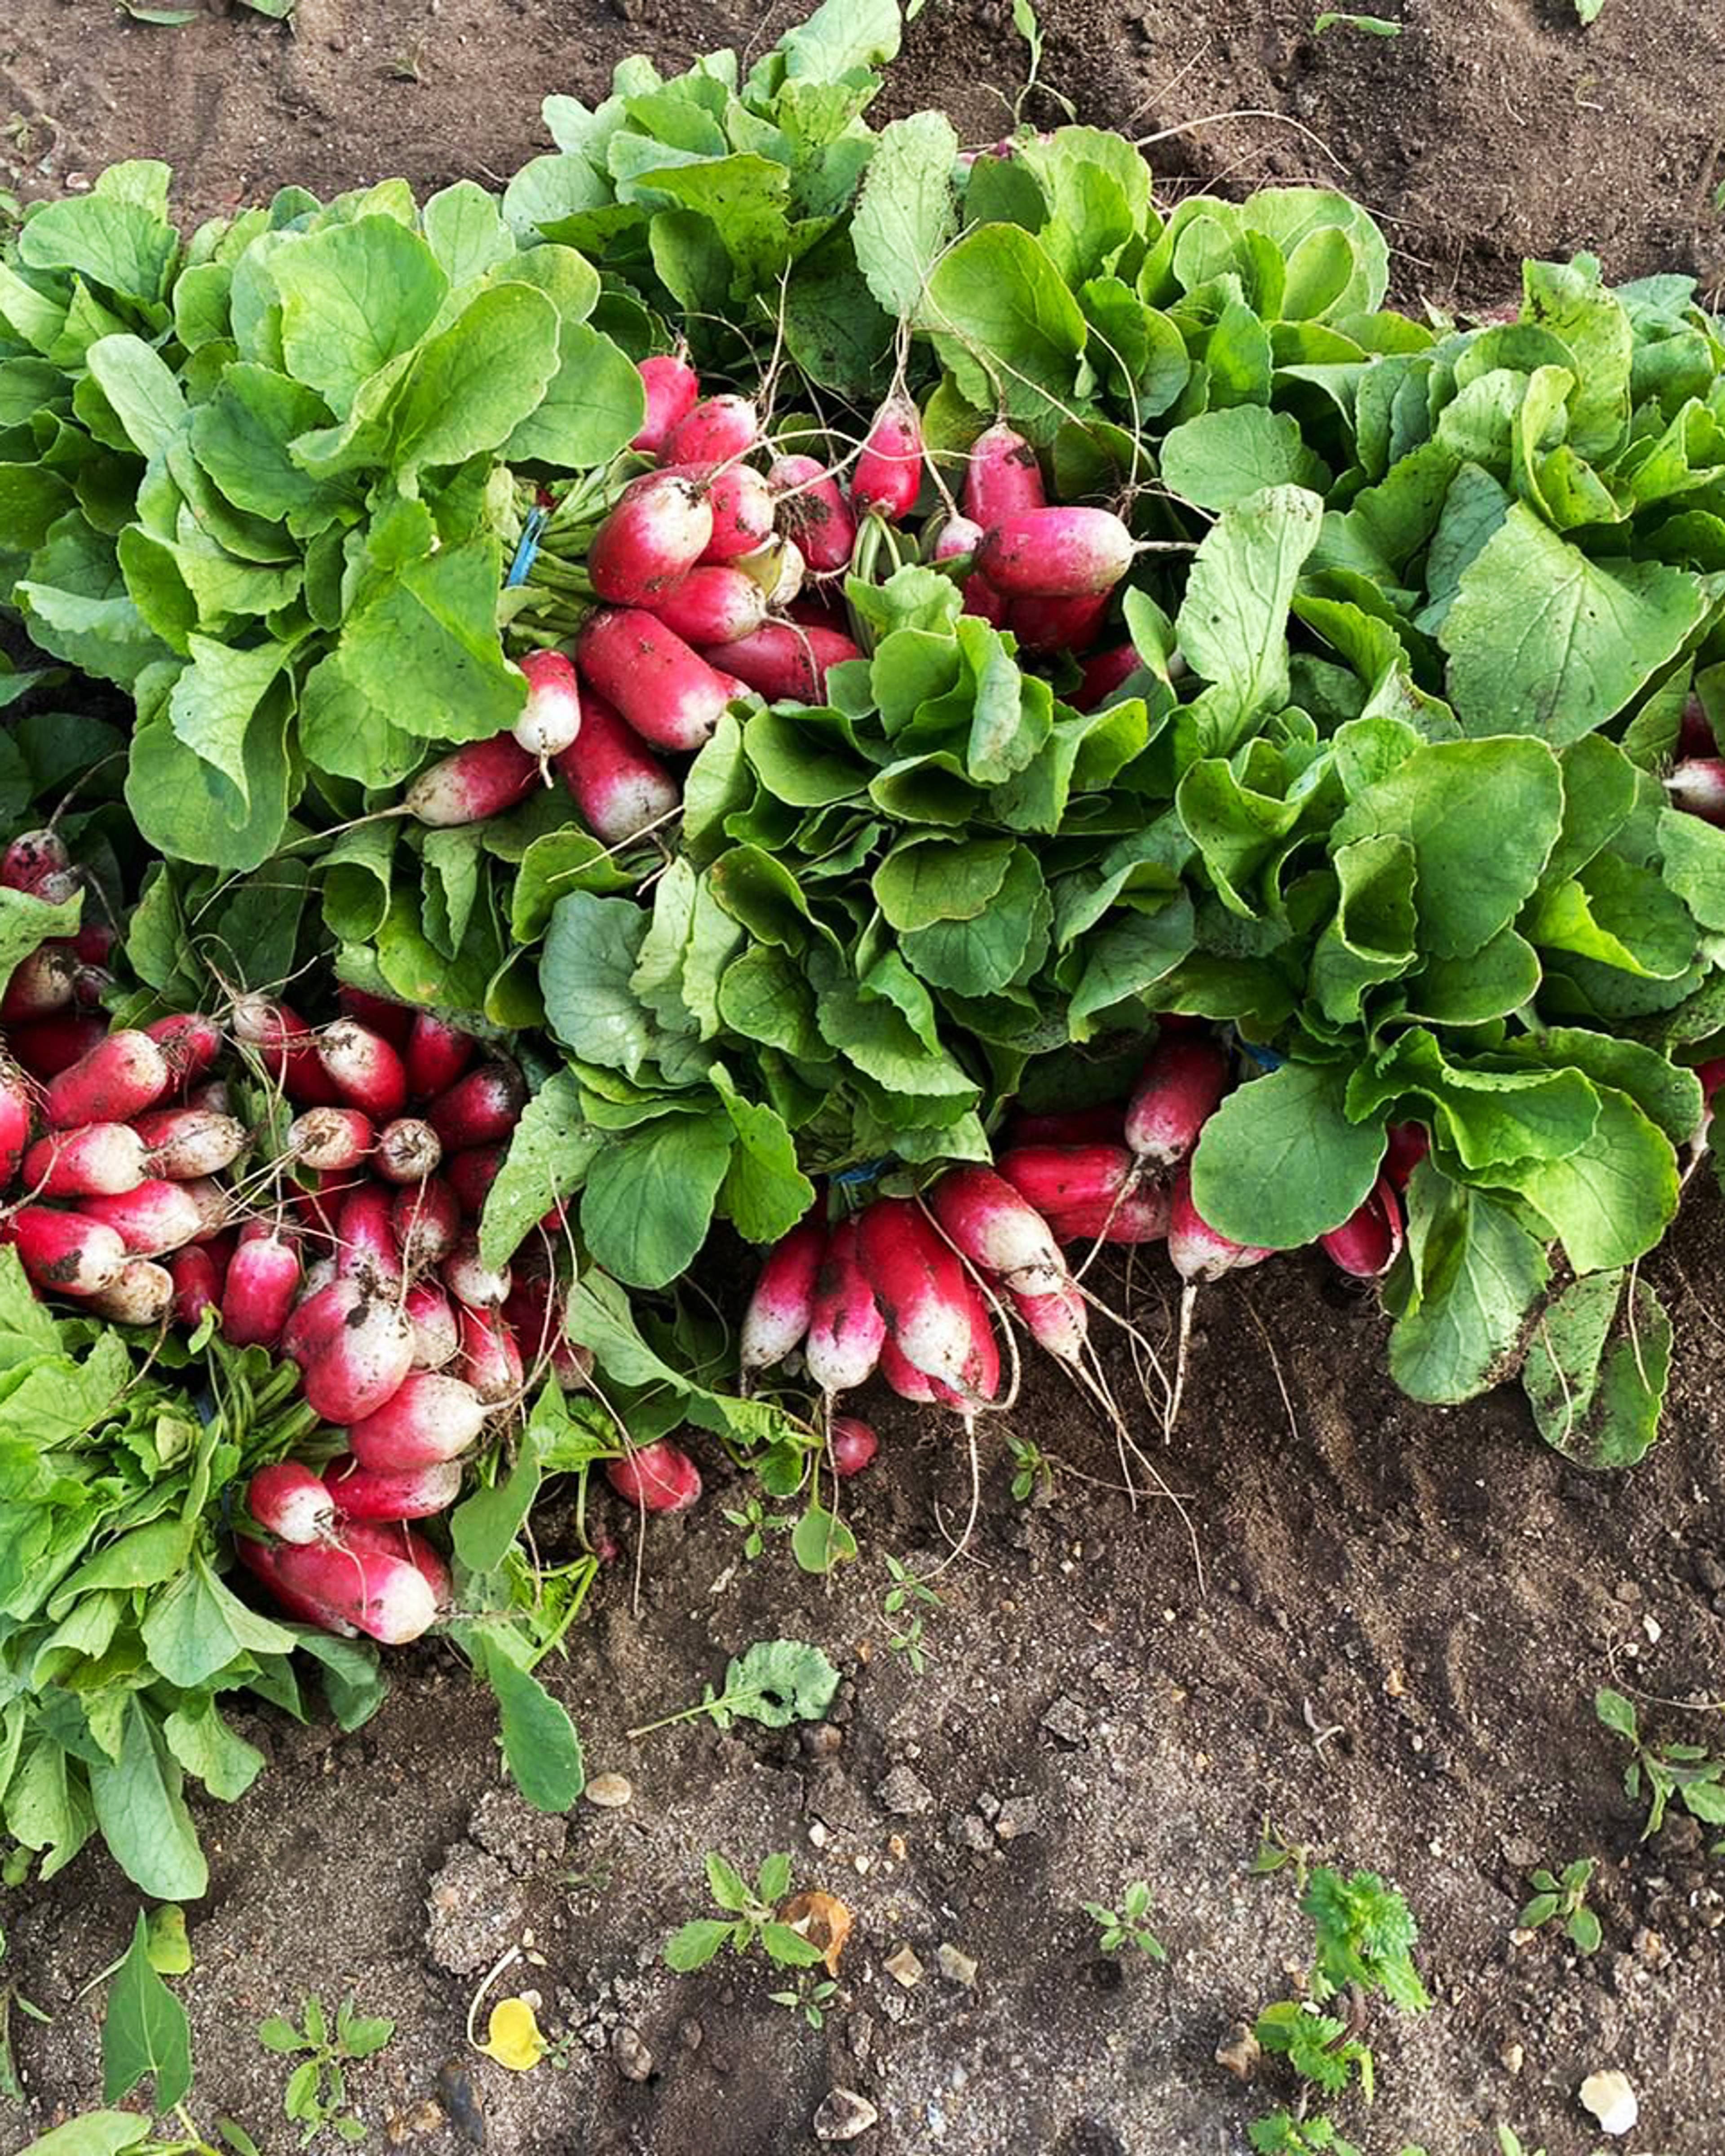 bunches of french breakfast radishes on the soil